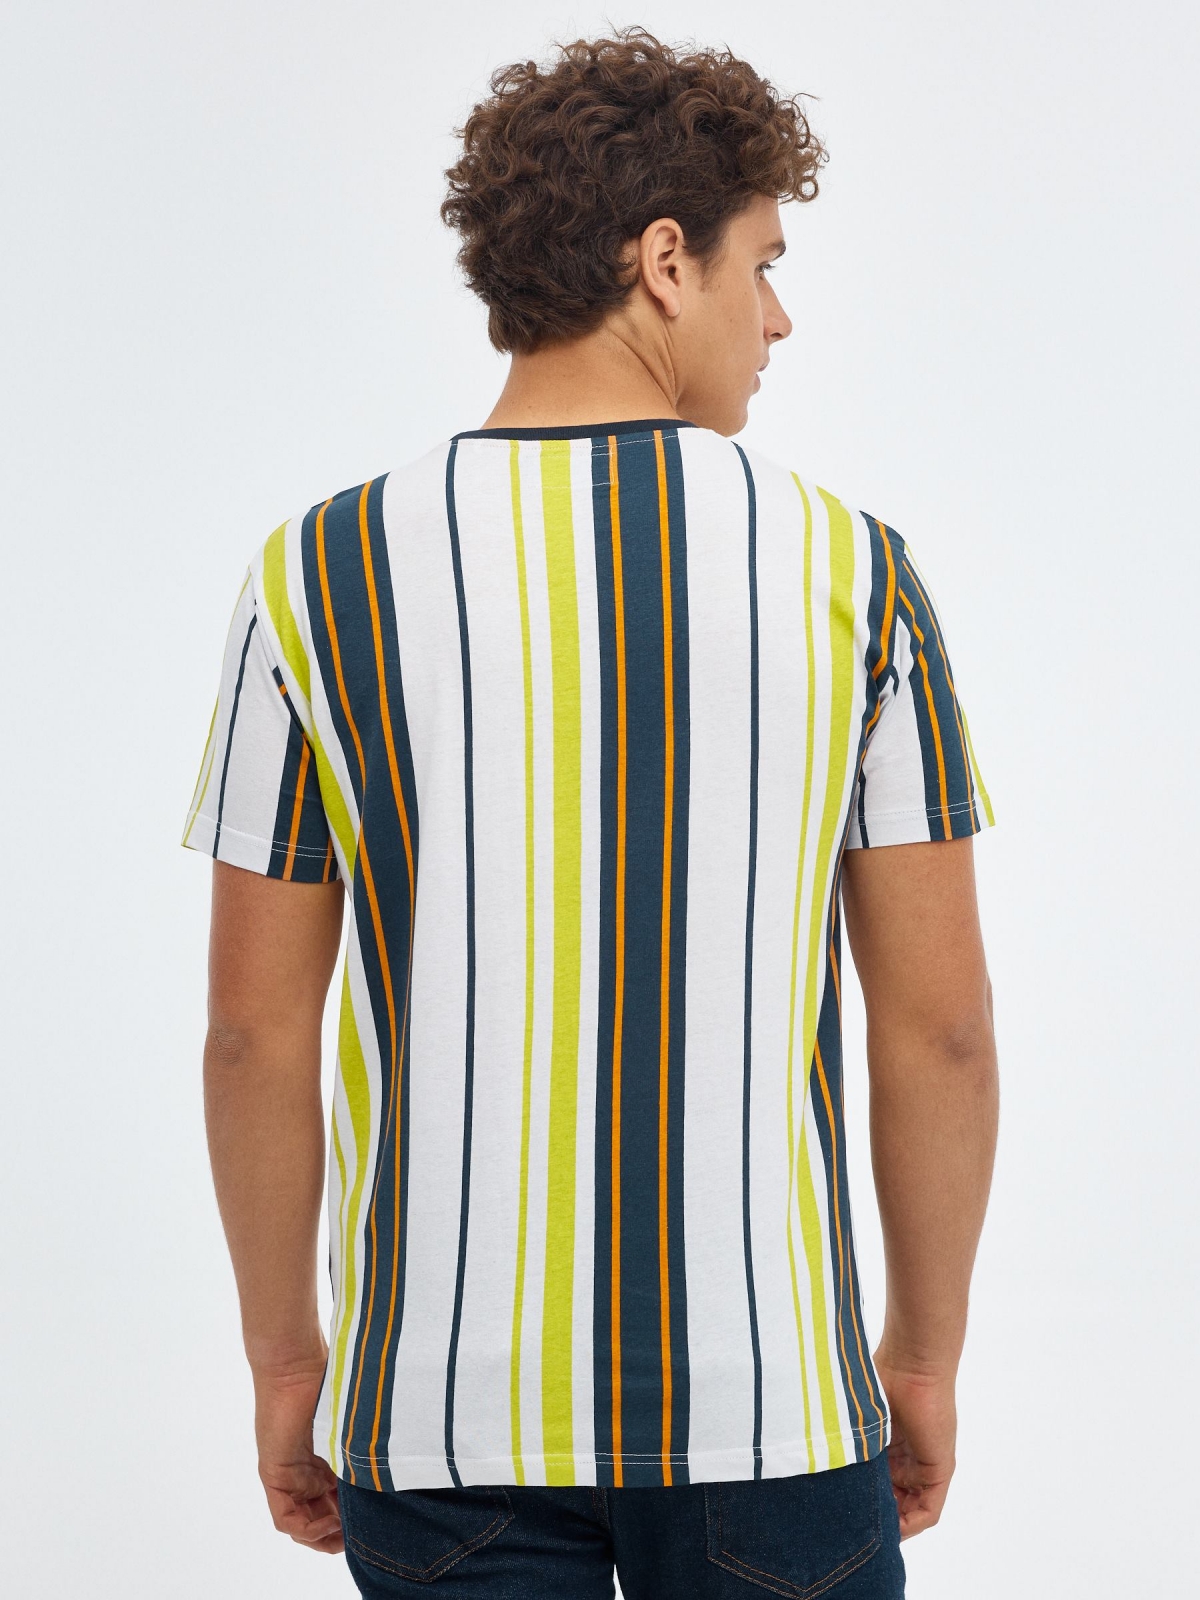 Multicoloured striped T-shirt white middle back view